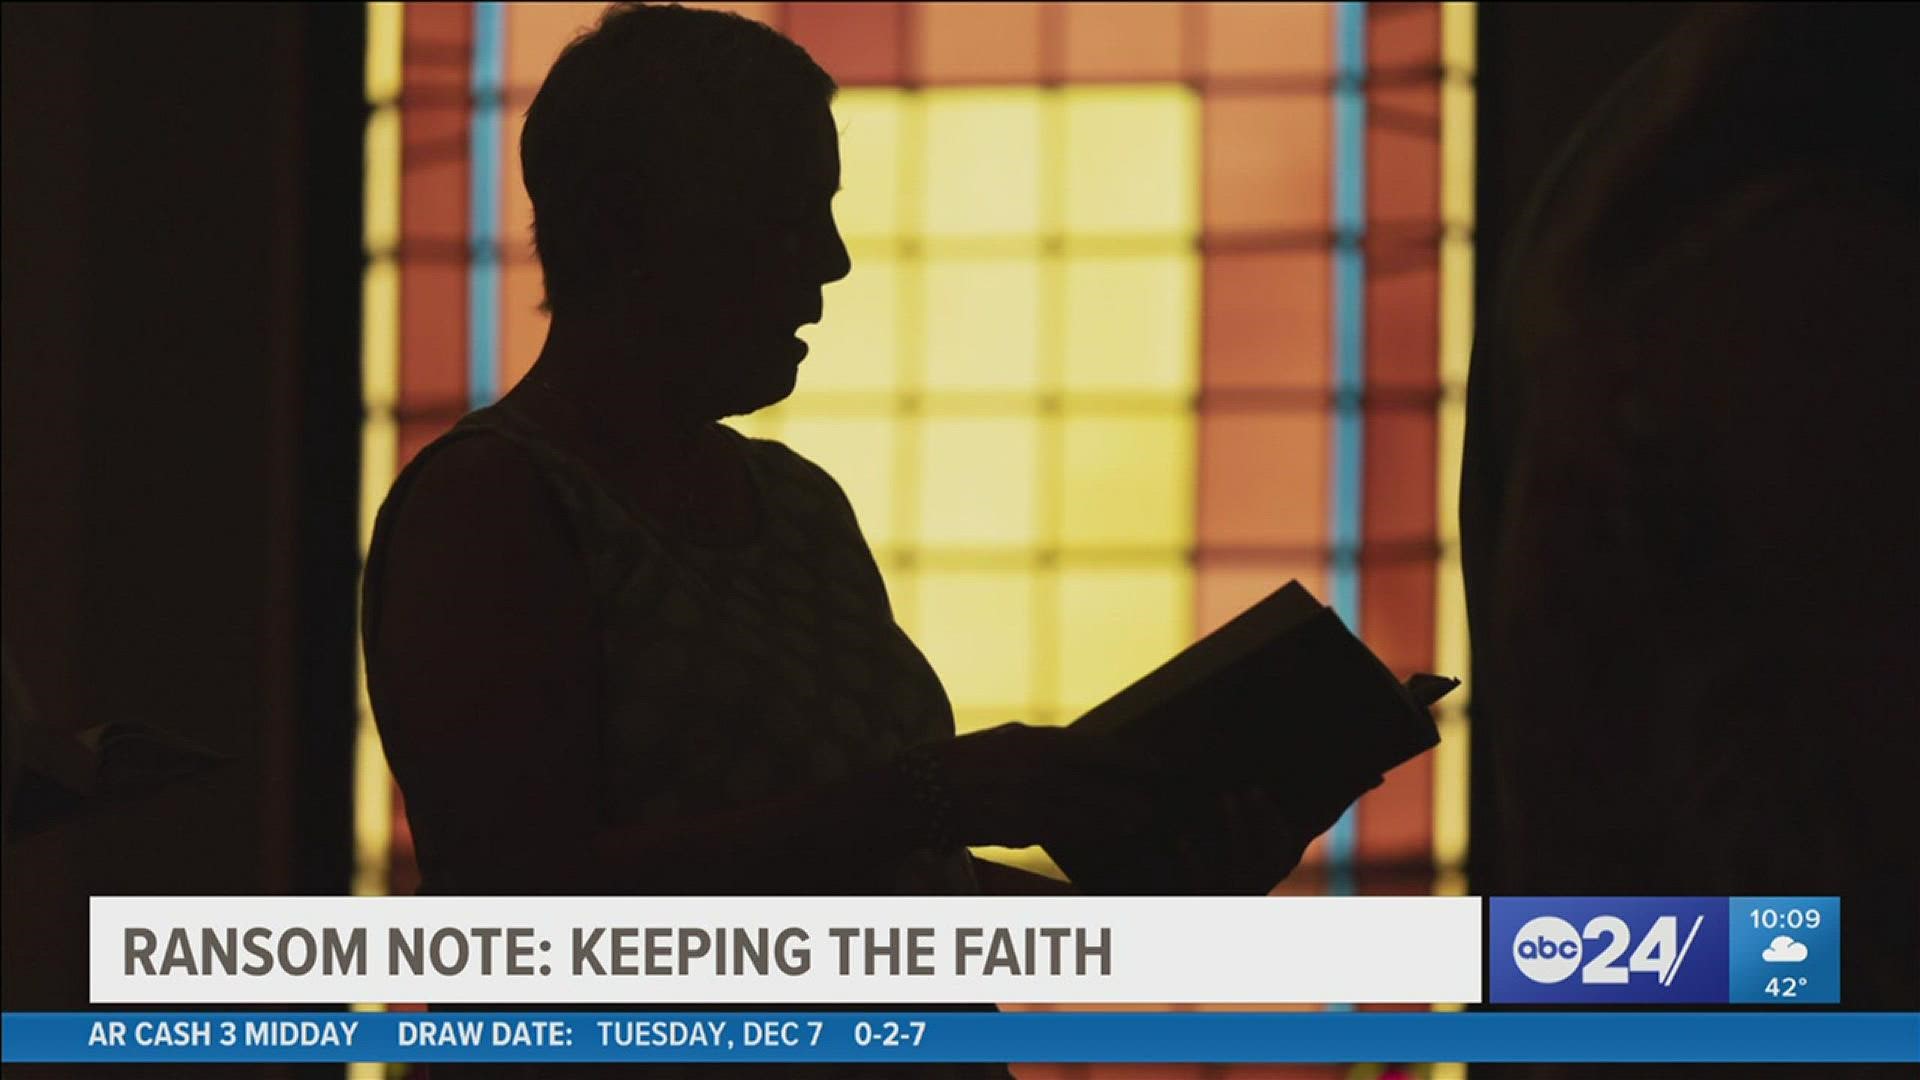 ABC24 Anchor Richard Ransom discusses in his Ransom Note about how churches are struggling to stay open with congregations shrinking.